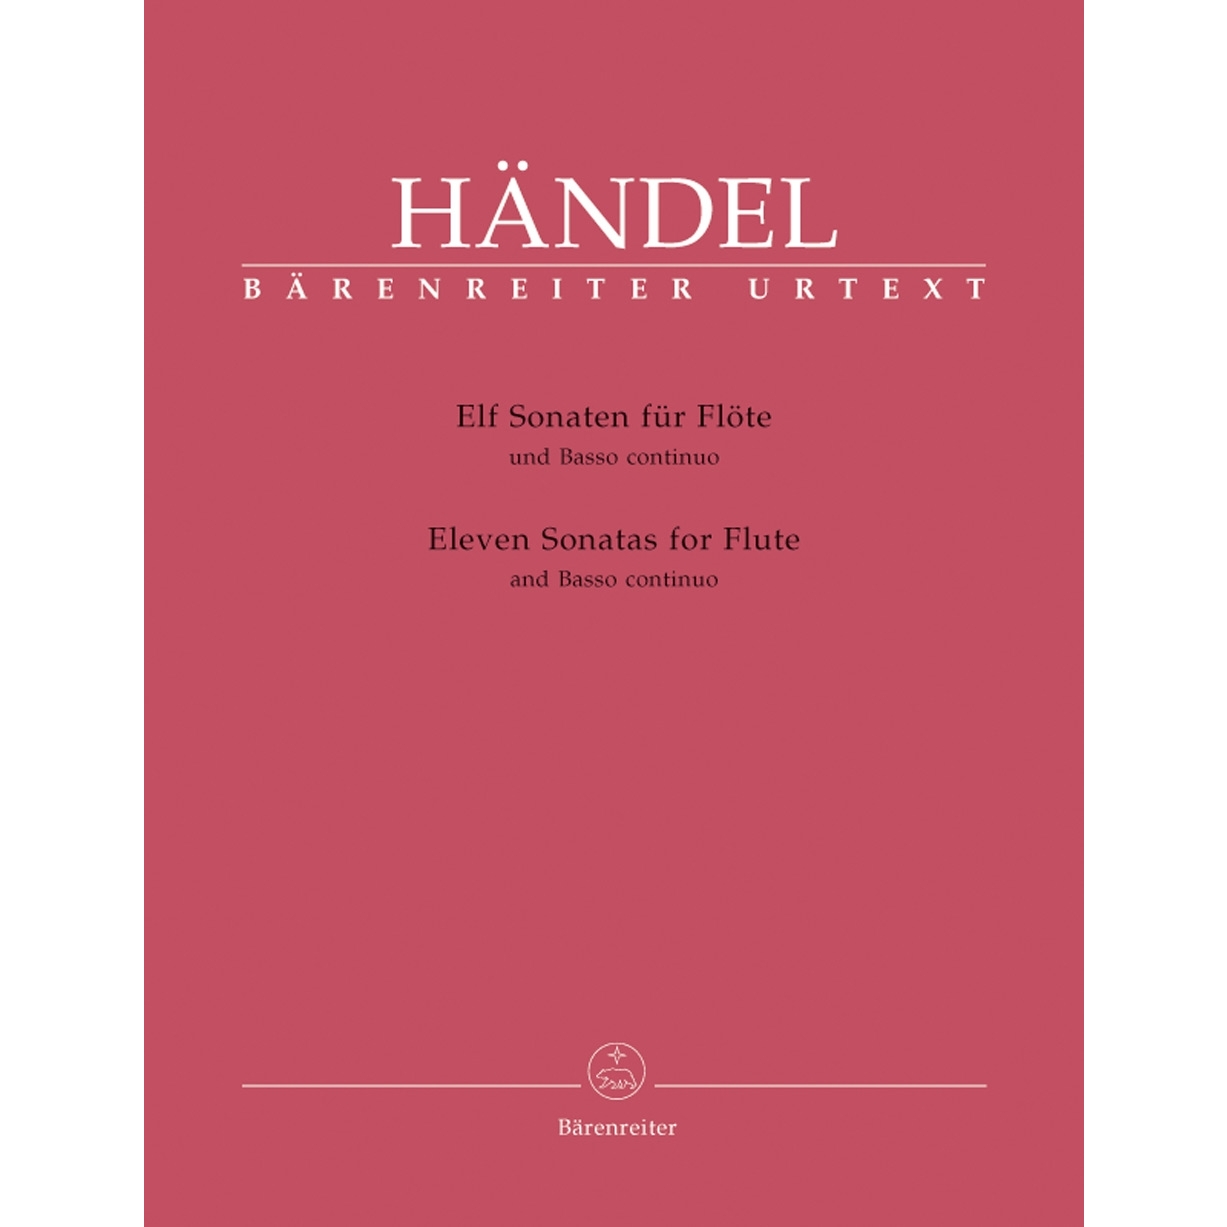 Op1 Basso Sonatas Händel. Eleven for Flute Continuo, - Flutes Just and G.F.